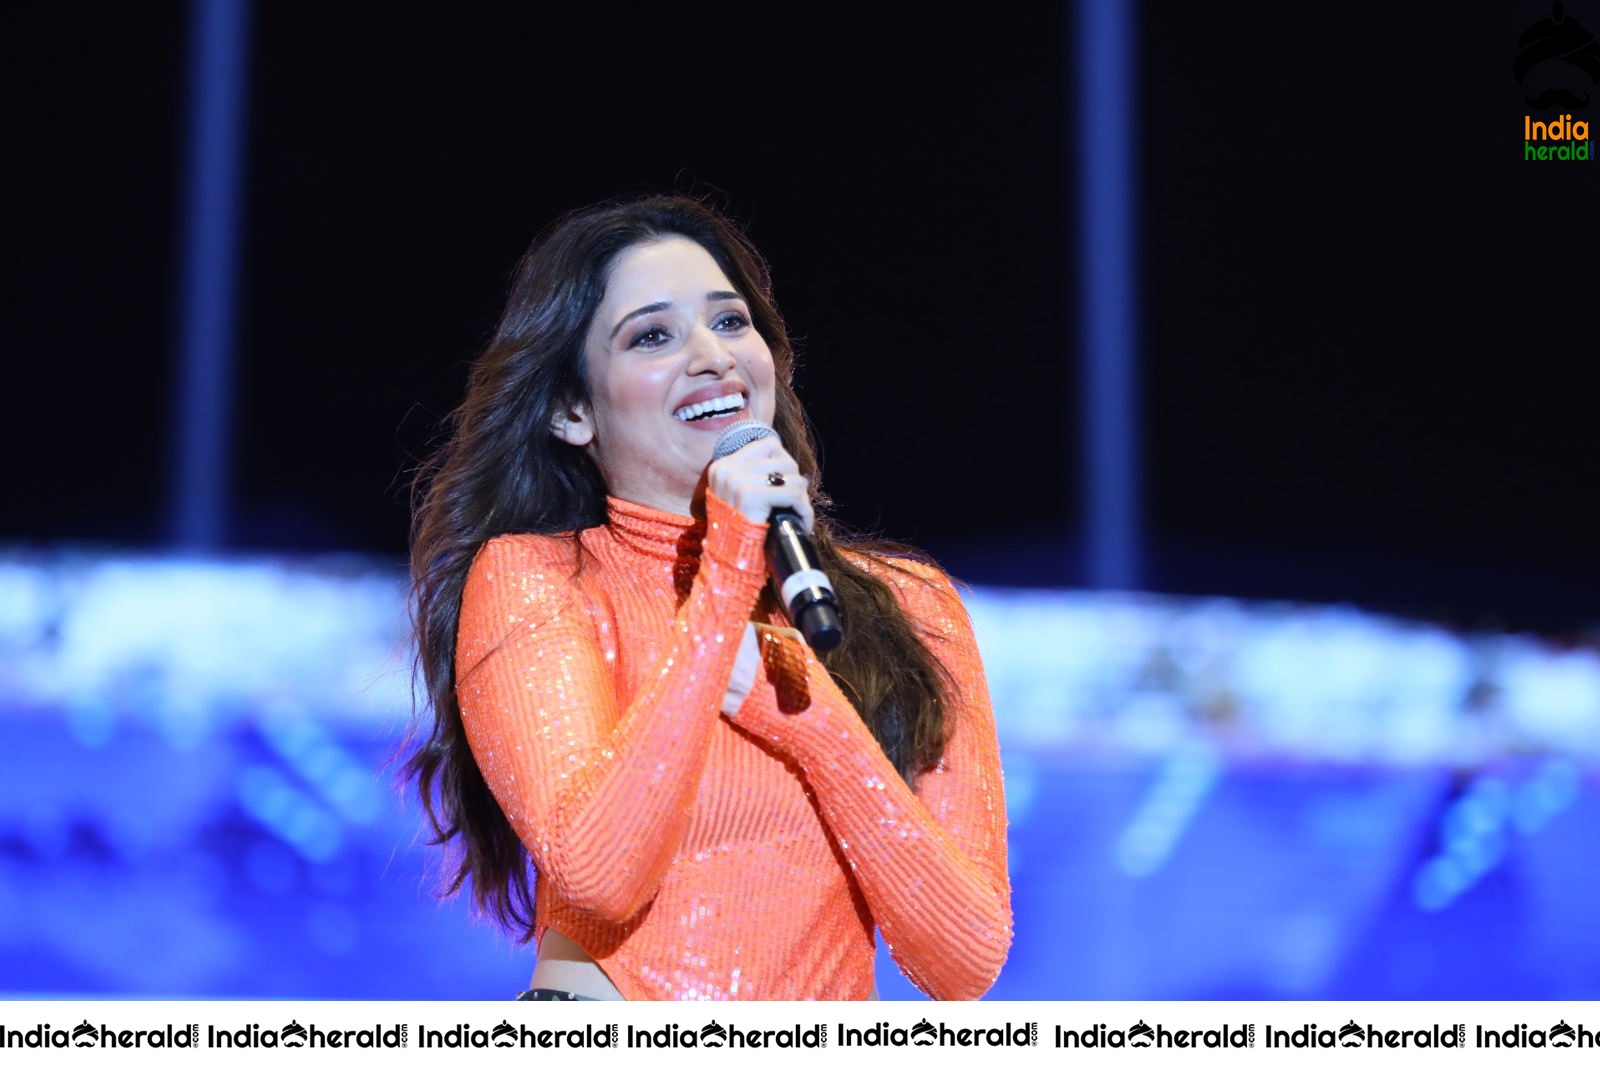 Tamanna Speaks to the Whole Crowd after her Hot dance Set 2